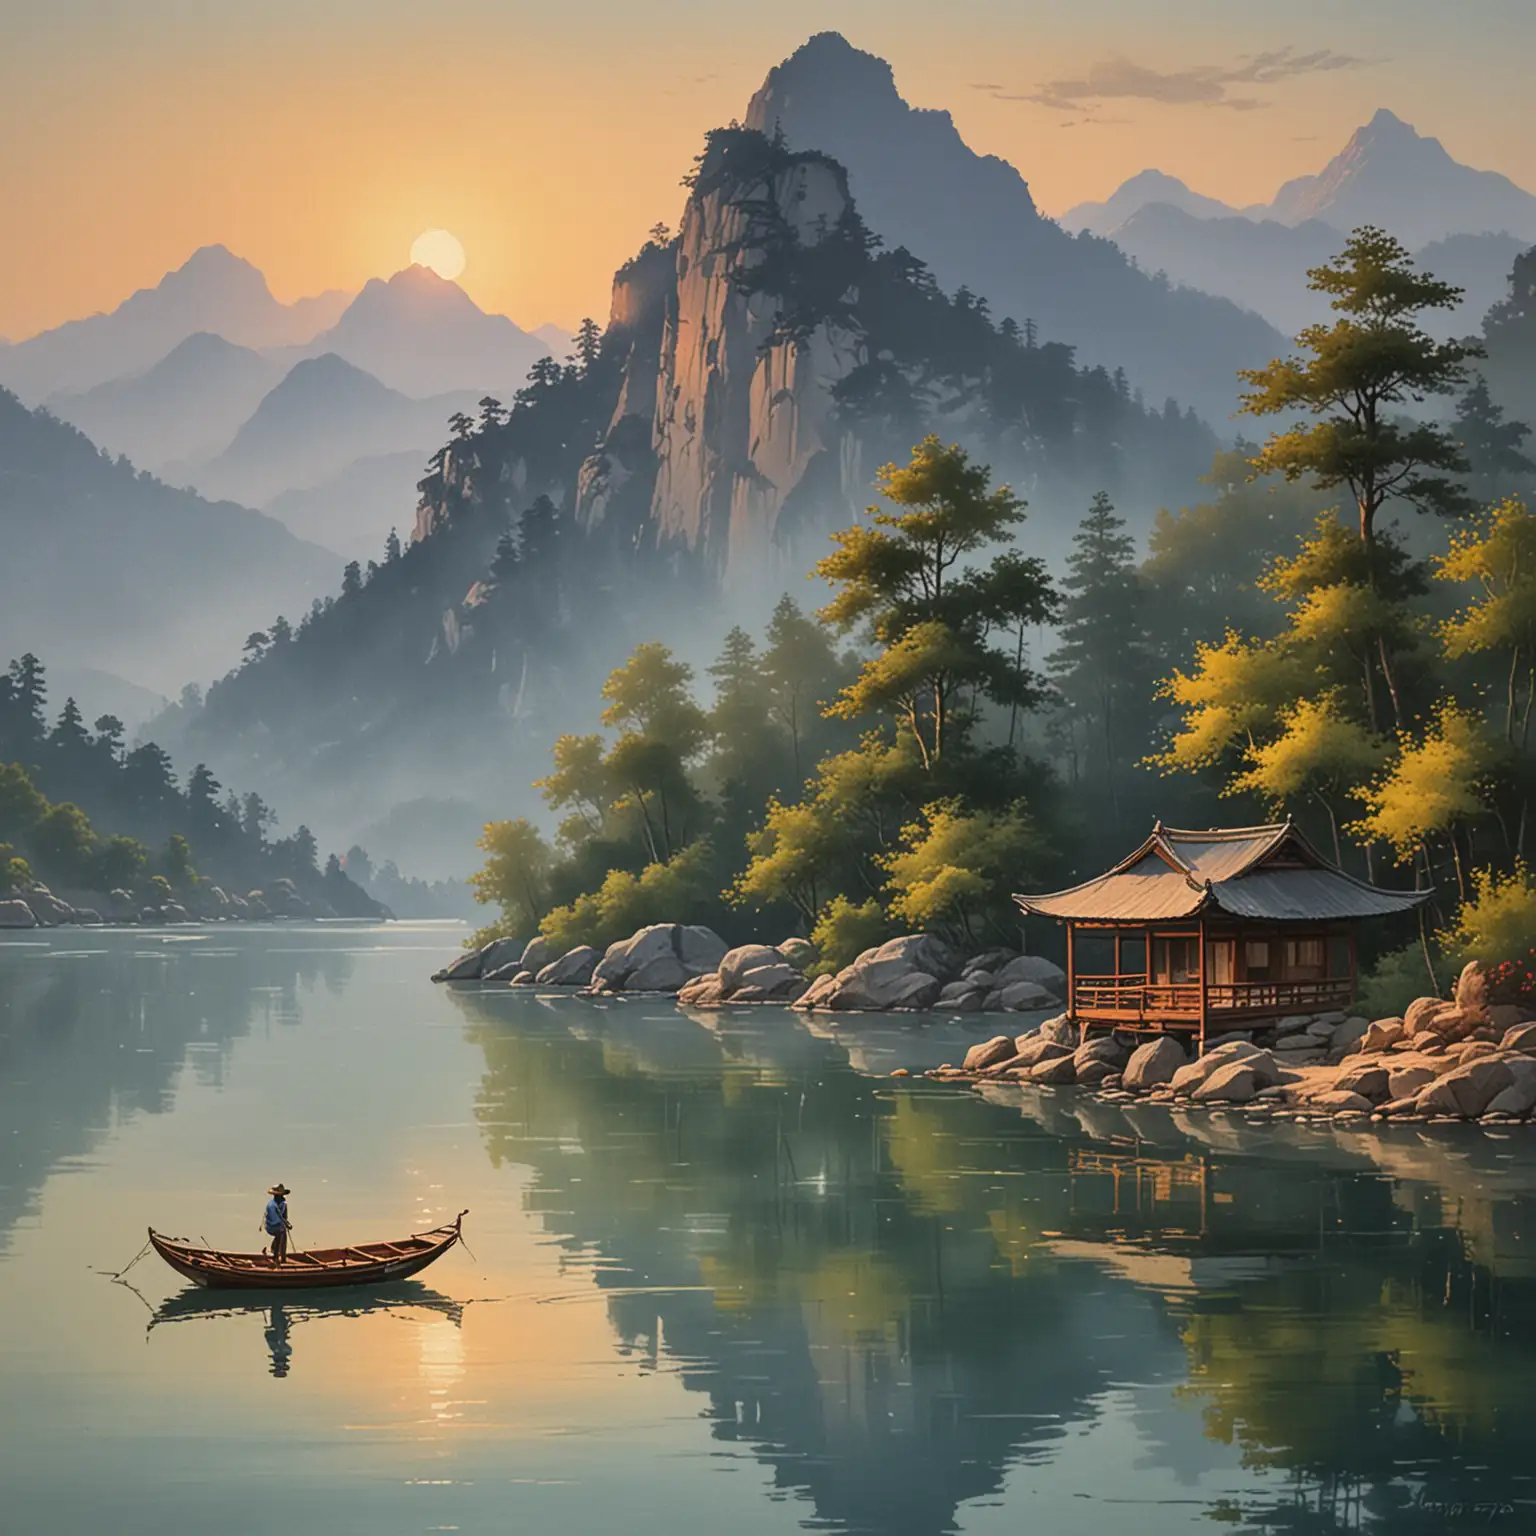 Mountain-and-Water-Painting-with-Pavilion-and-Small-Boat-at-Evening